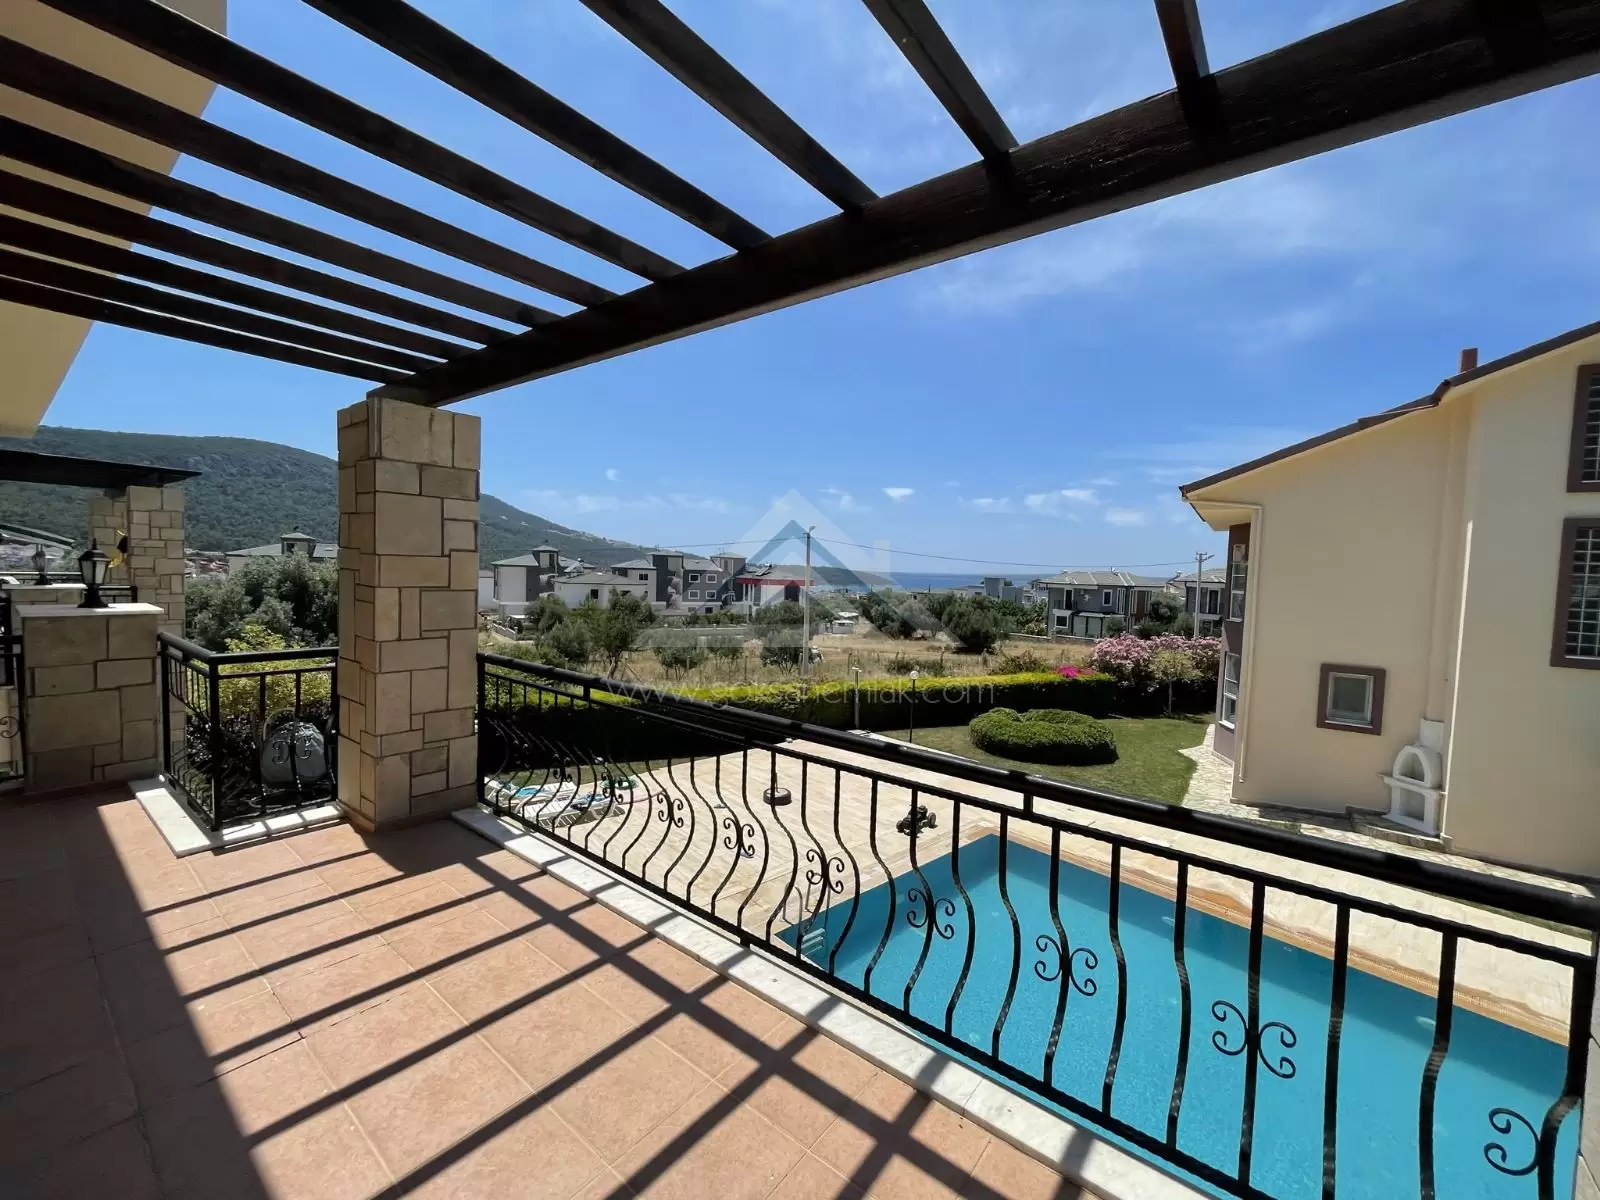 Detached Villa With Sea View And Pool For Sale in Akbuk